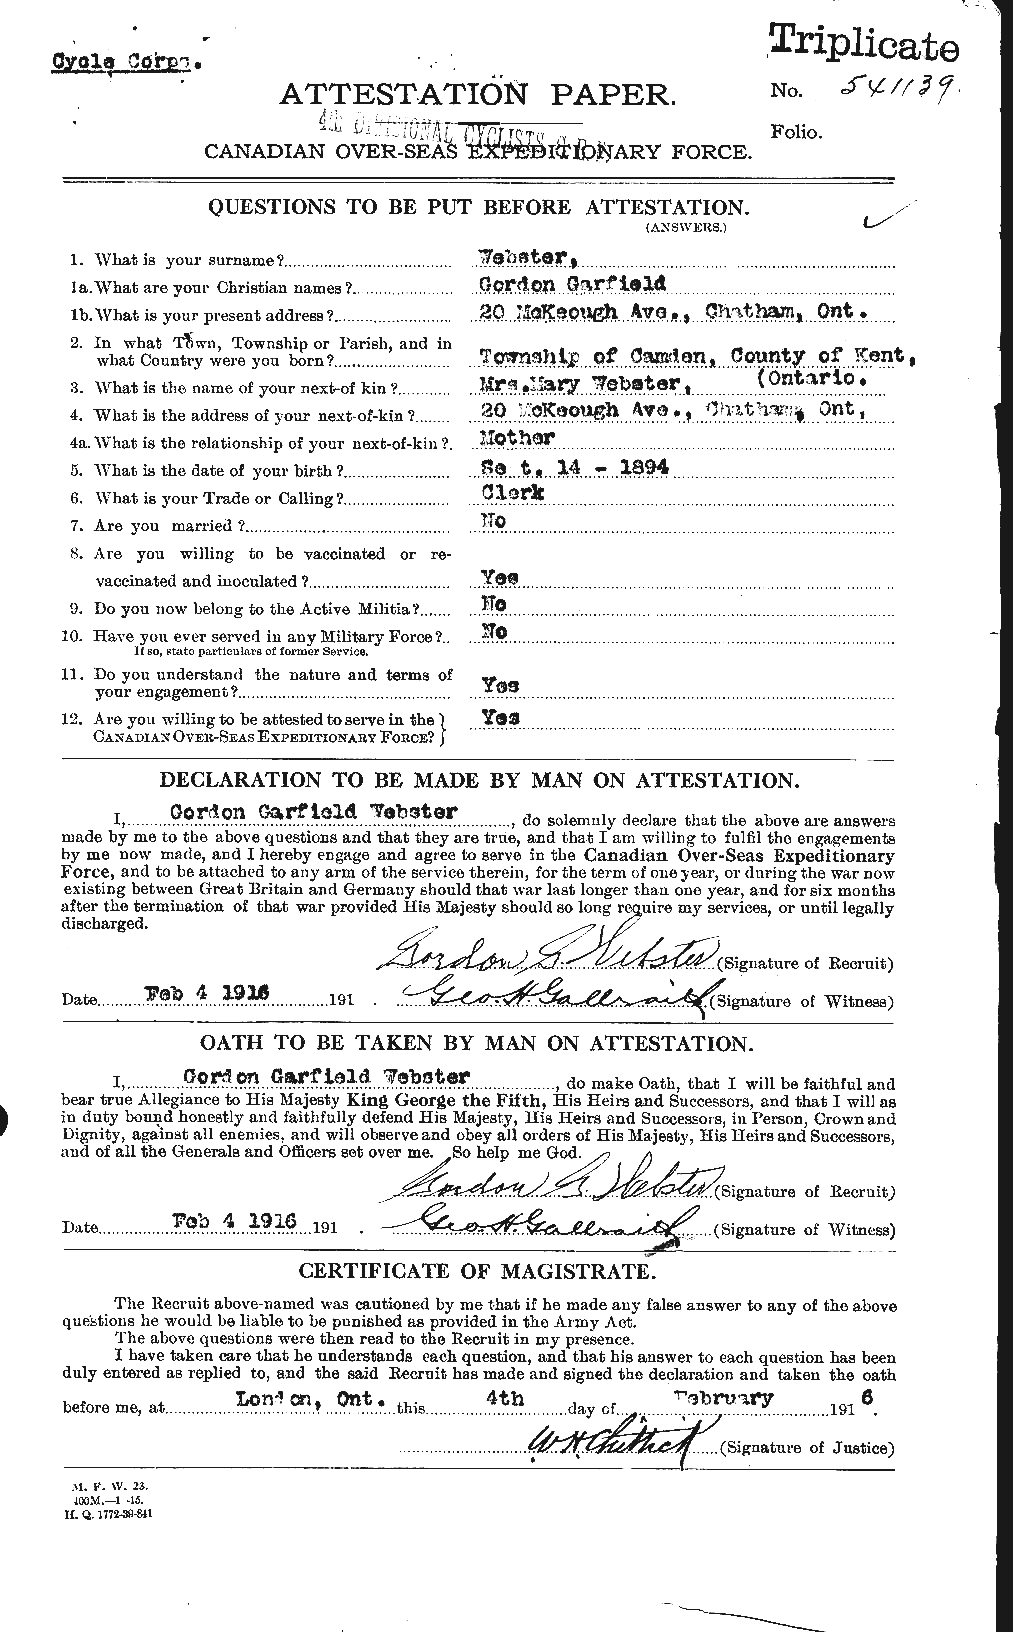 Personnel Records of the First World War - CEF 670398a